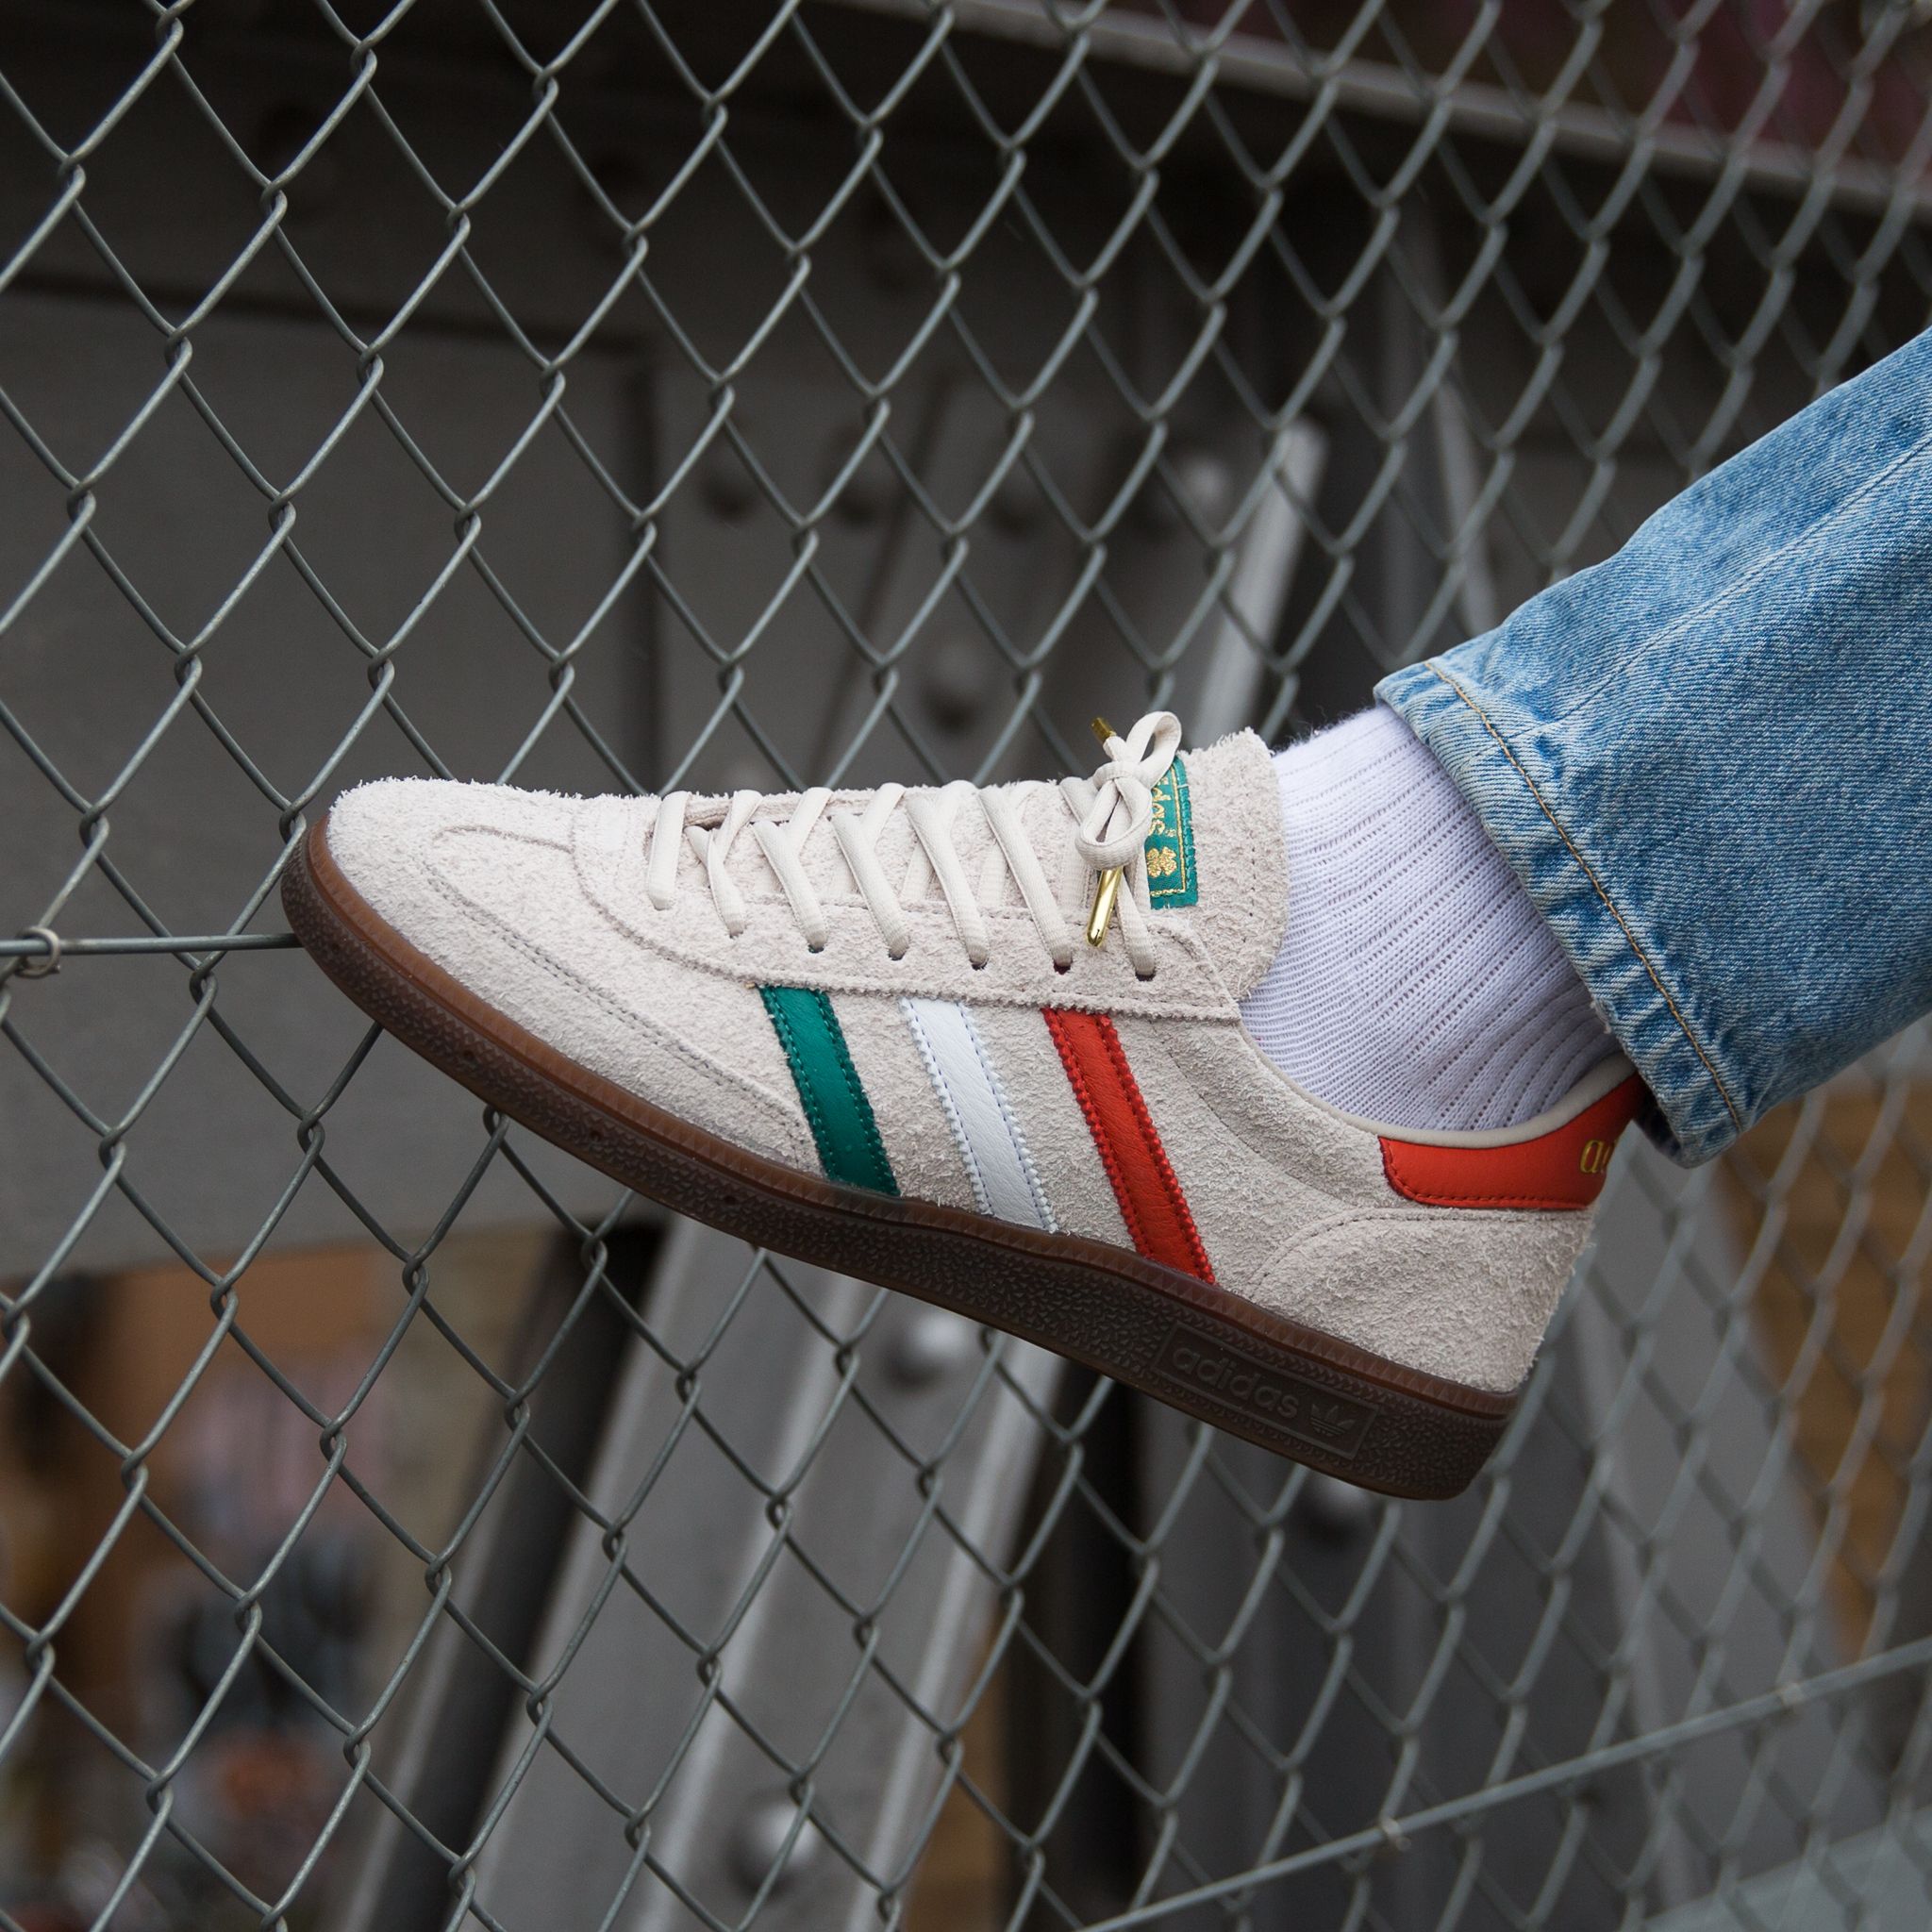 Titolo on Twitter: "Adidas Handball Spezial "St. Patrick's Day" link ➡️  https://t.co/IDz6AsihkL and in–store at Zurich and Berne locations. UK 6.5  (40) - UK 11 (46) style code 🔎 DB3570 https://t.co/ahTRtPI1Dd" /